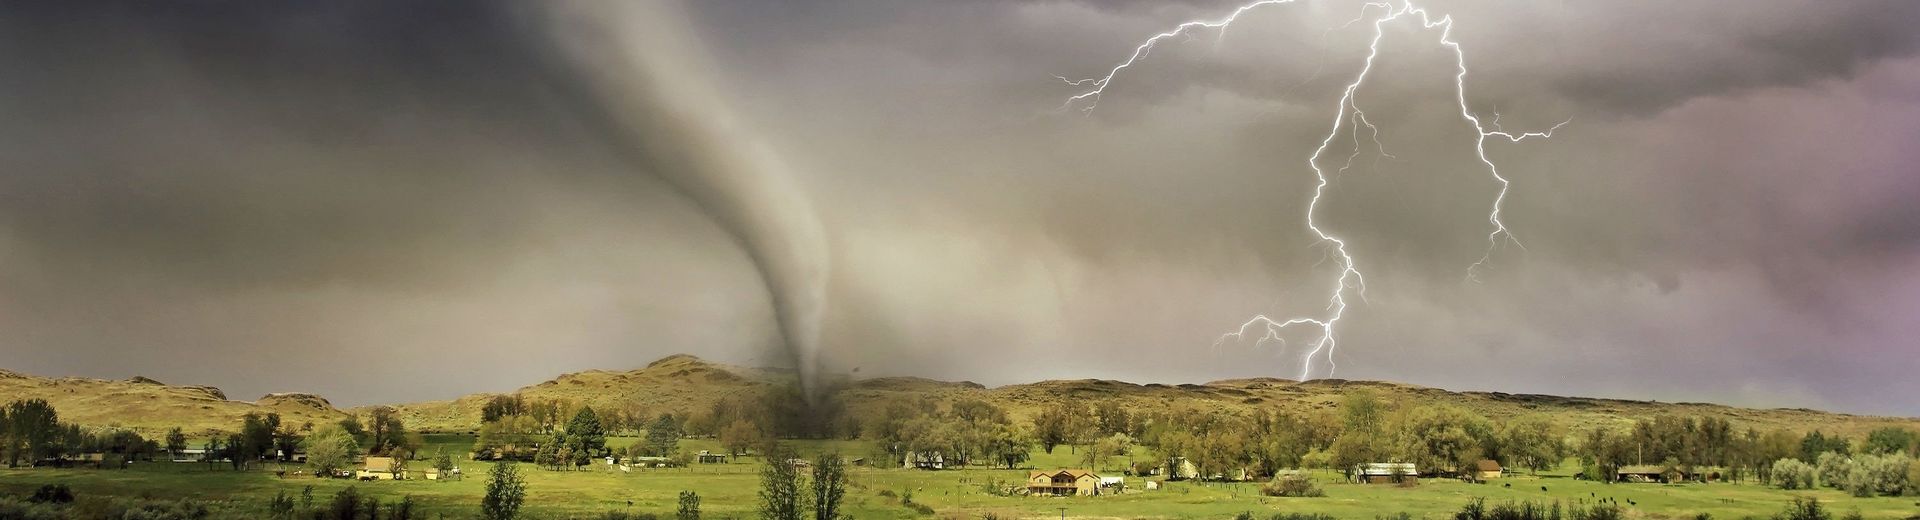 a tornado moving across the countryside